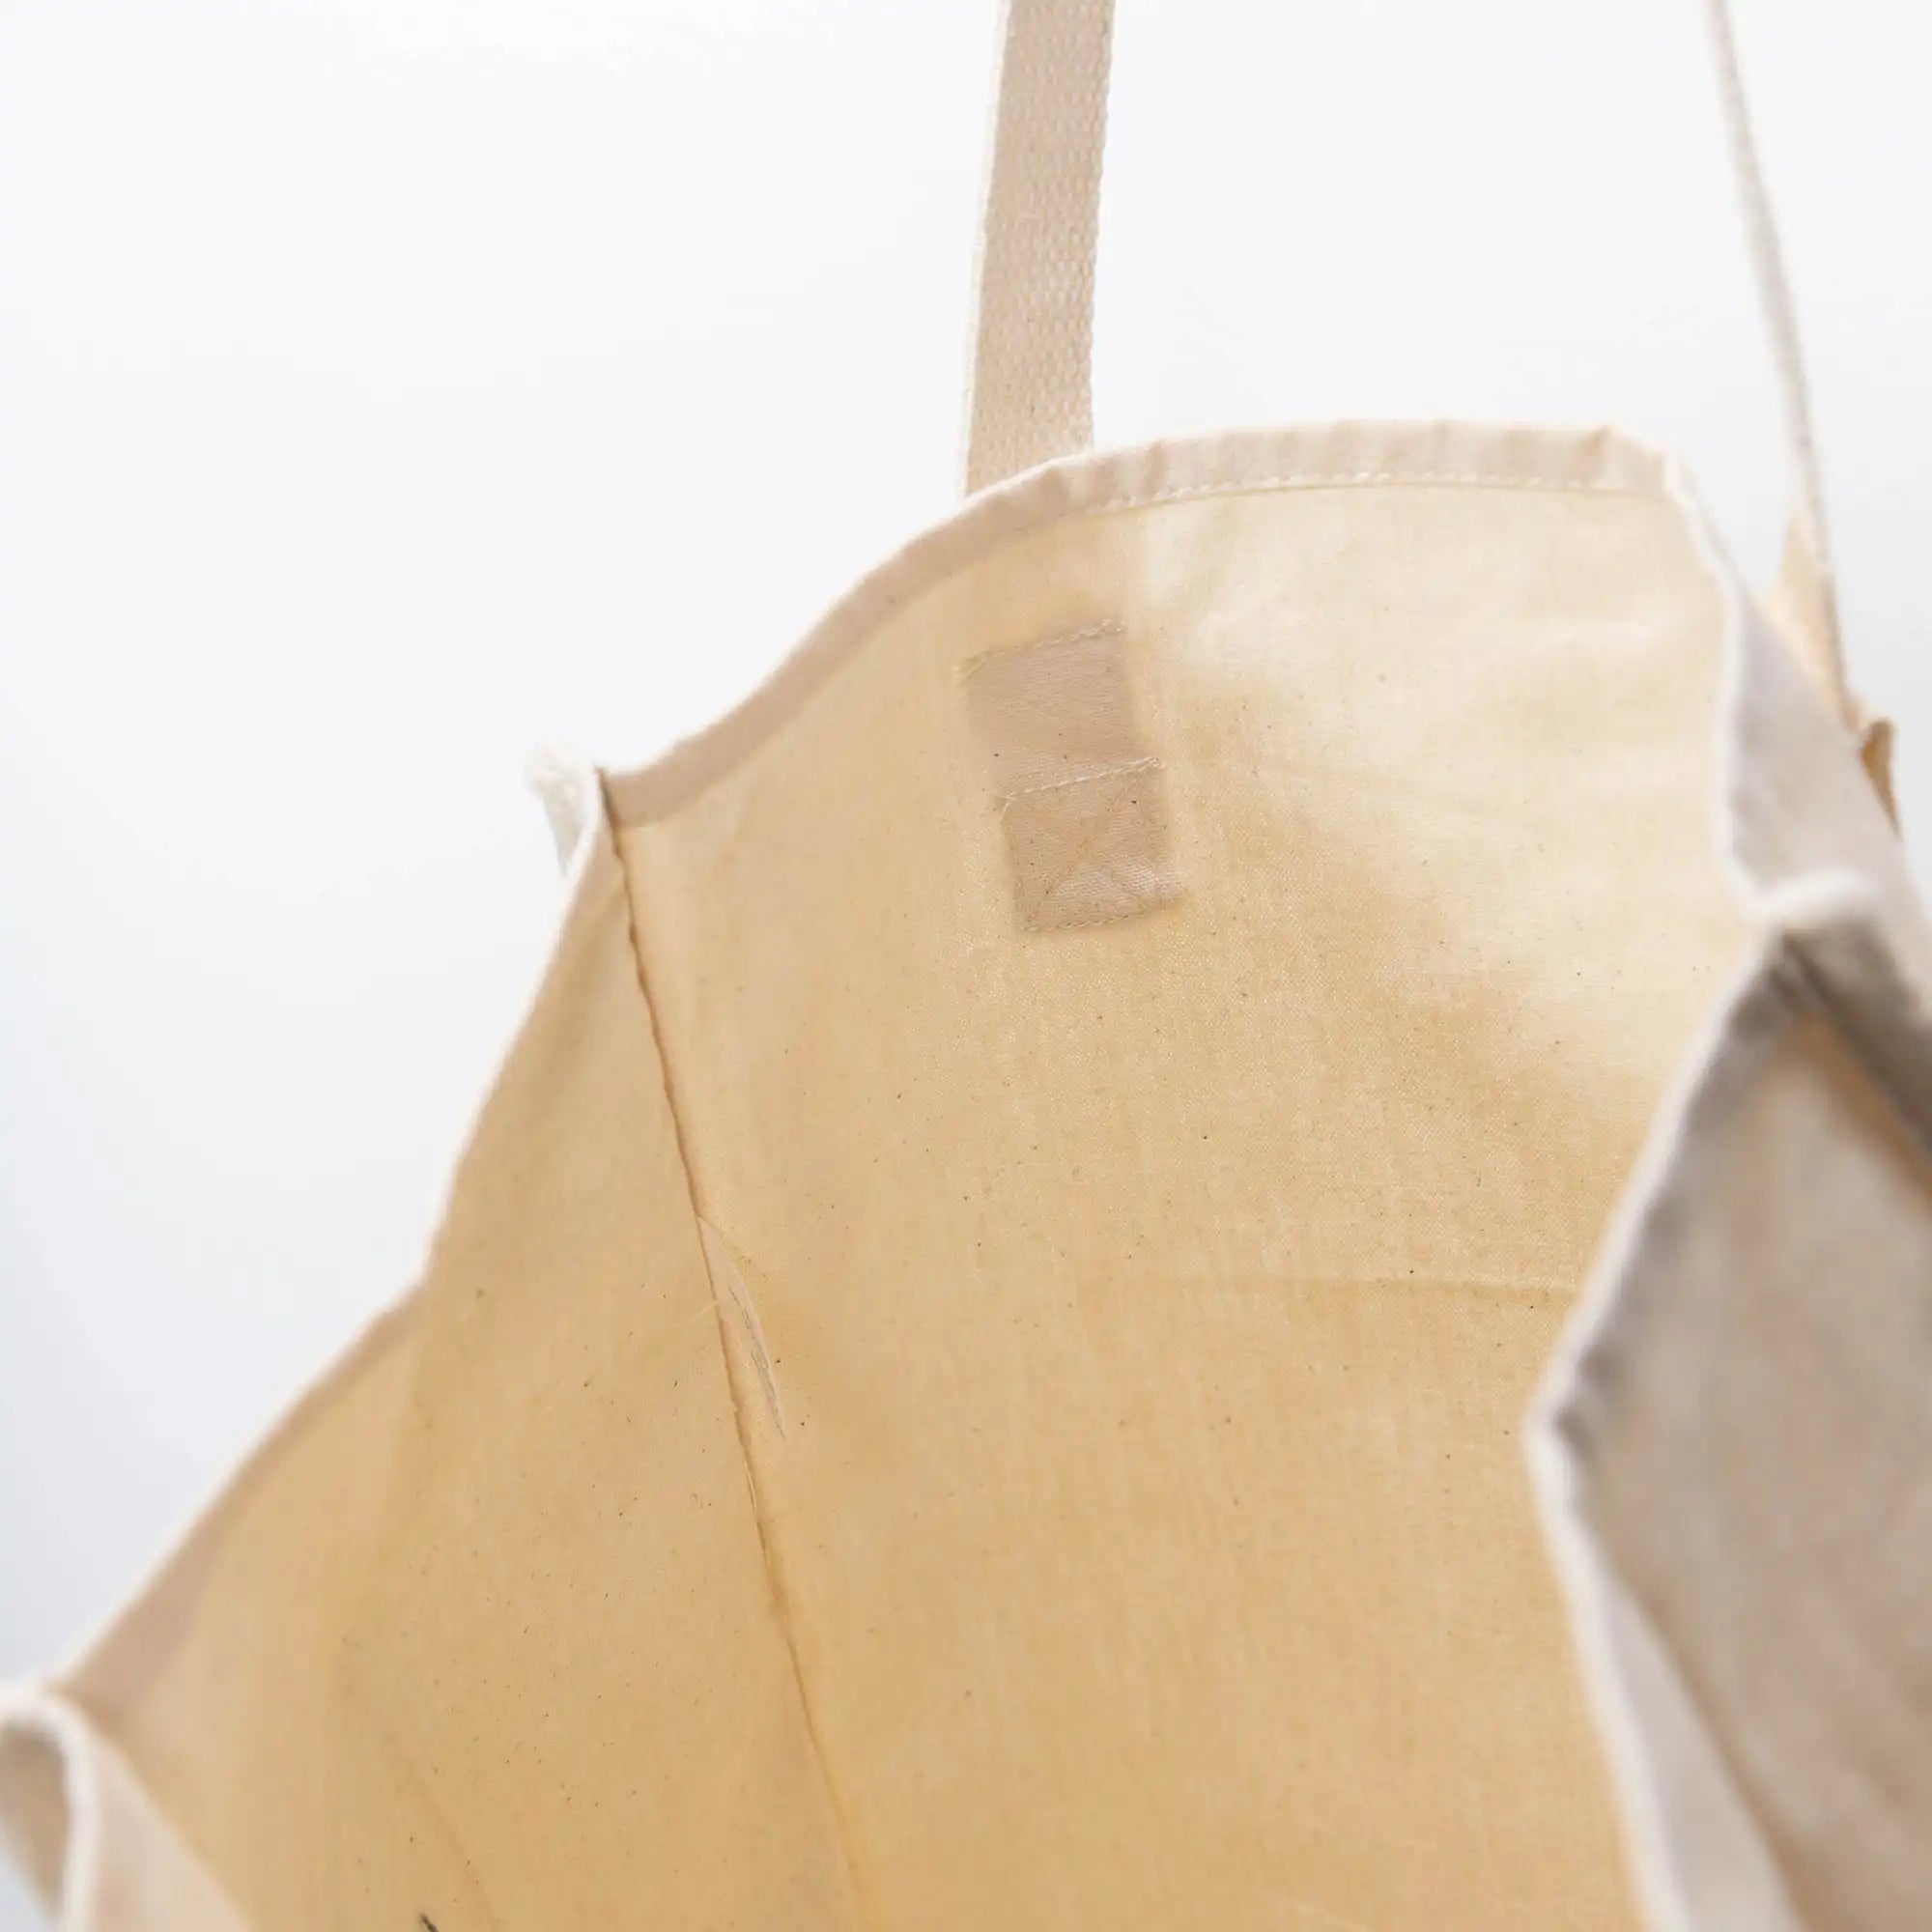 Market Tote Bag in Natural Wheat color